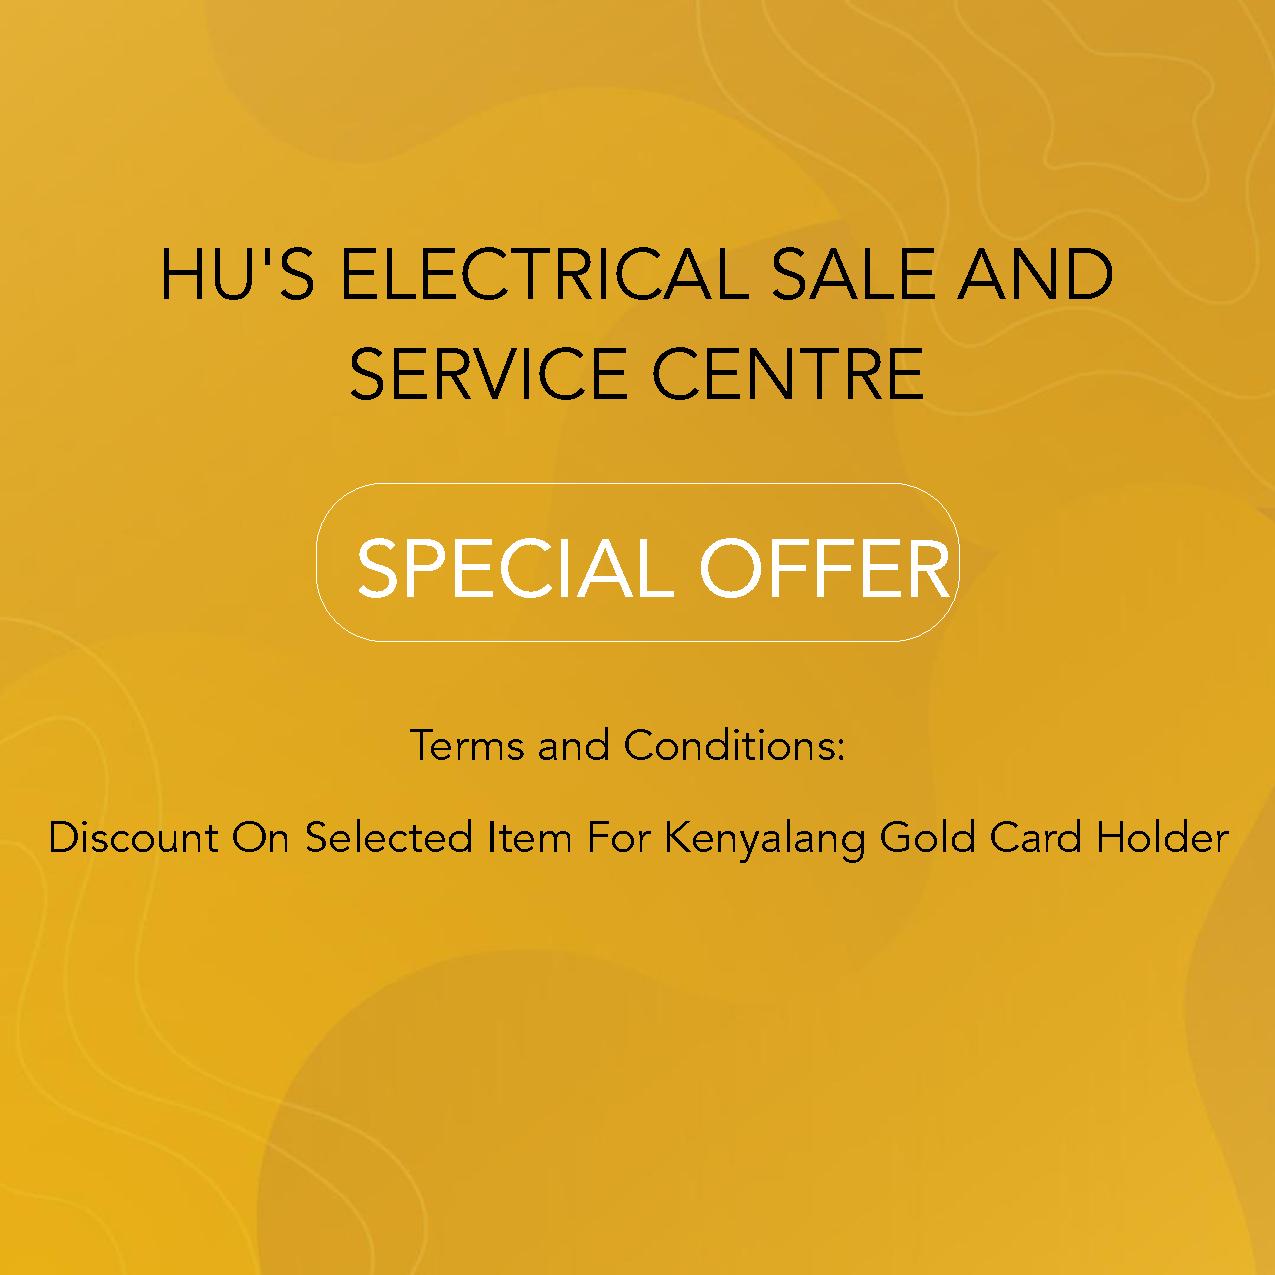 HU'S ELECTRICAL SALE AND SERVICE CENTRE